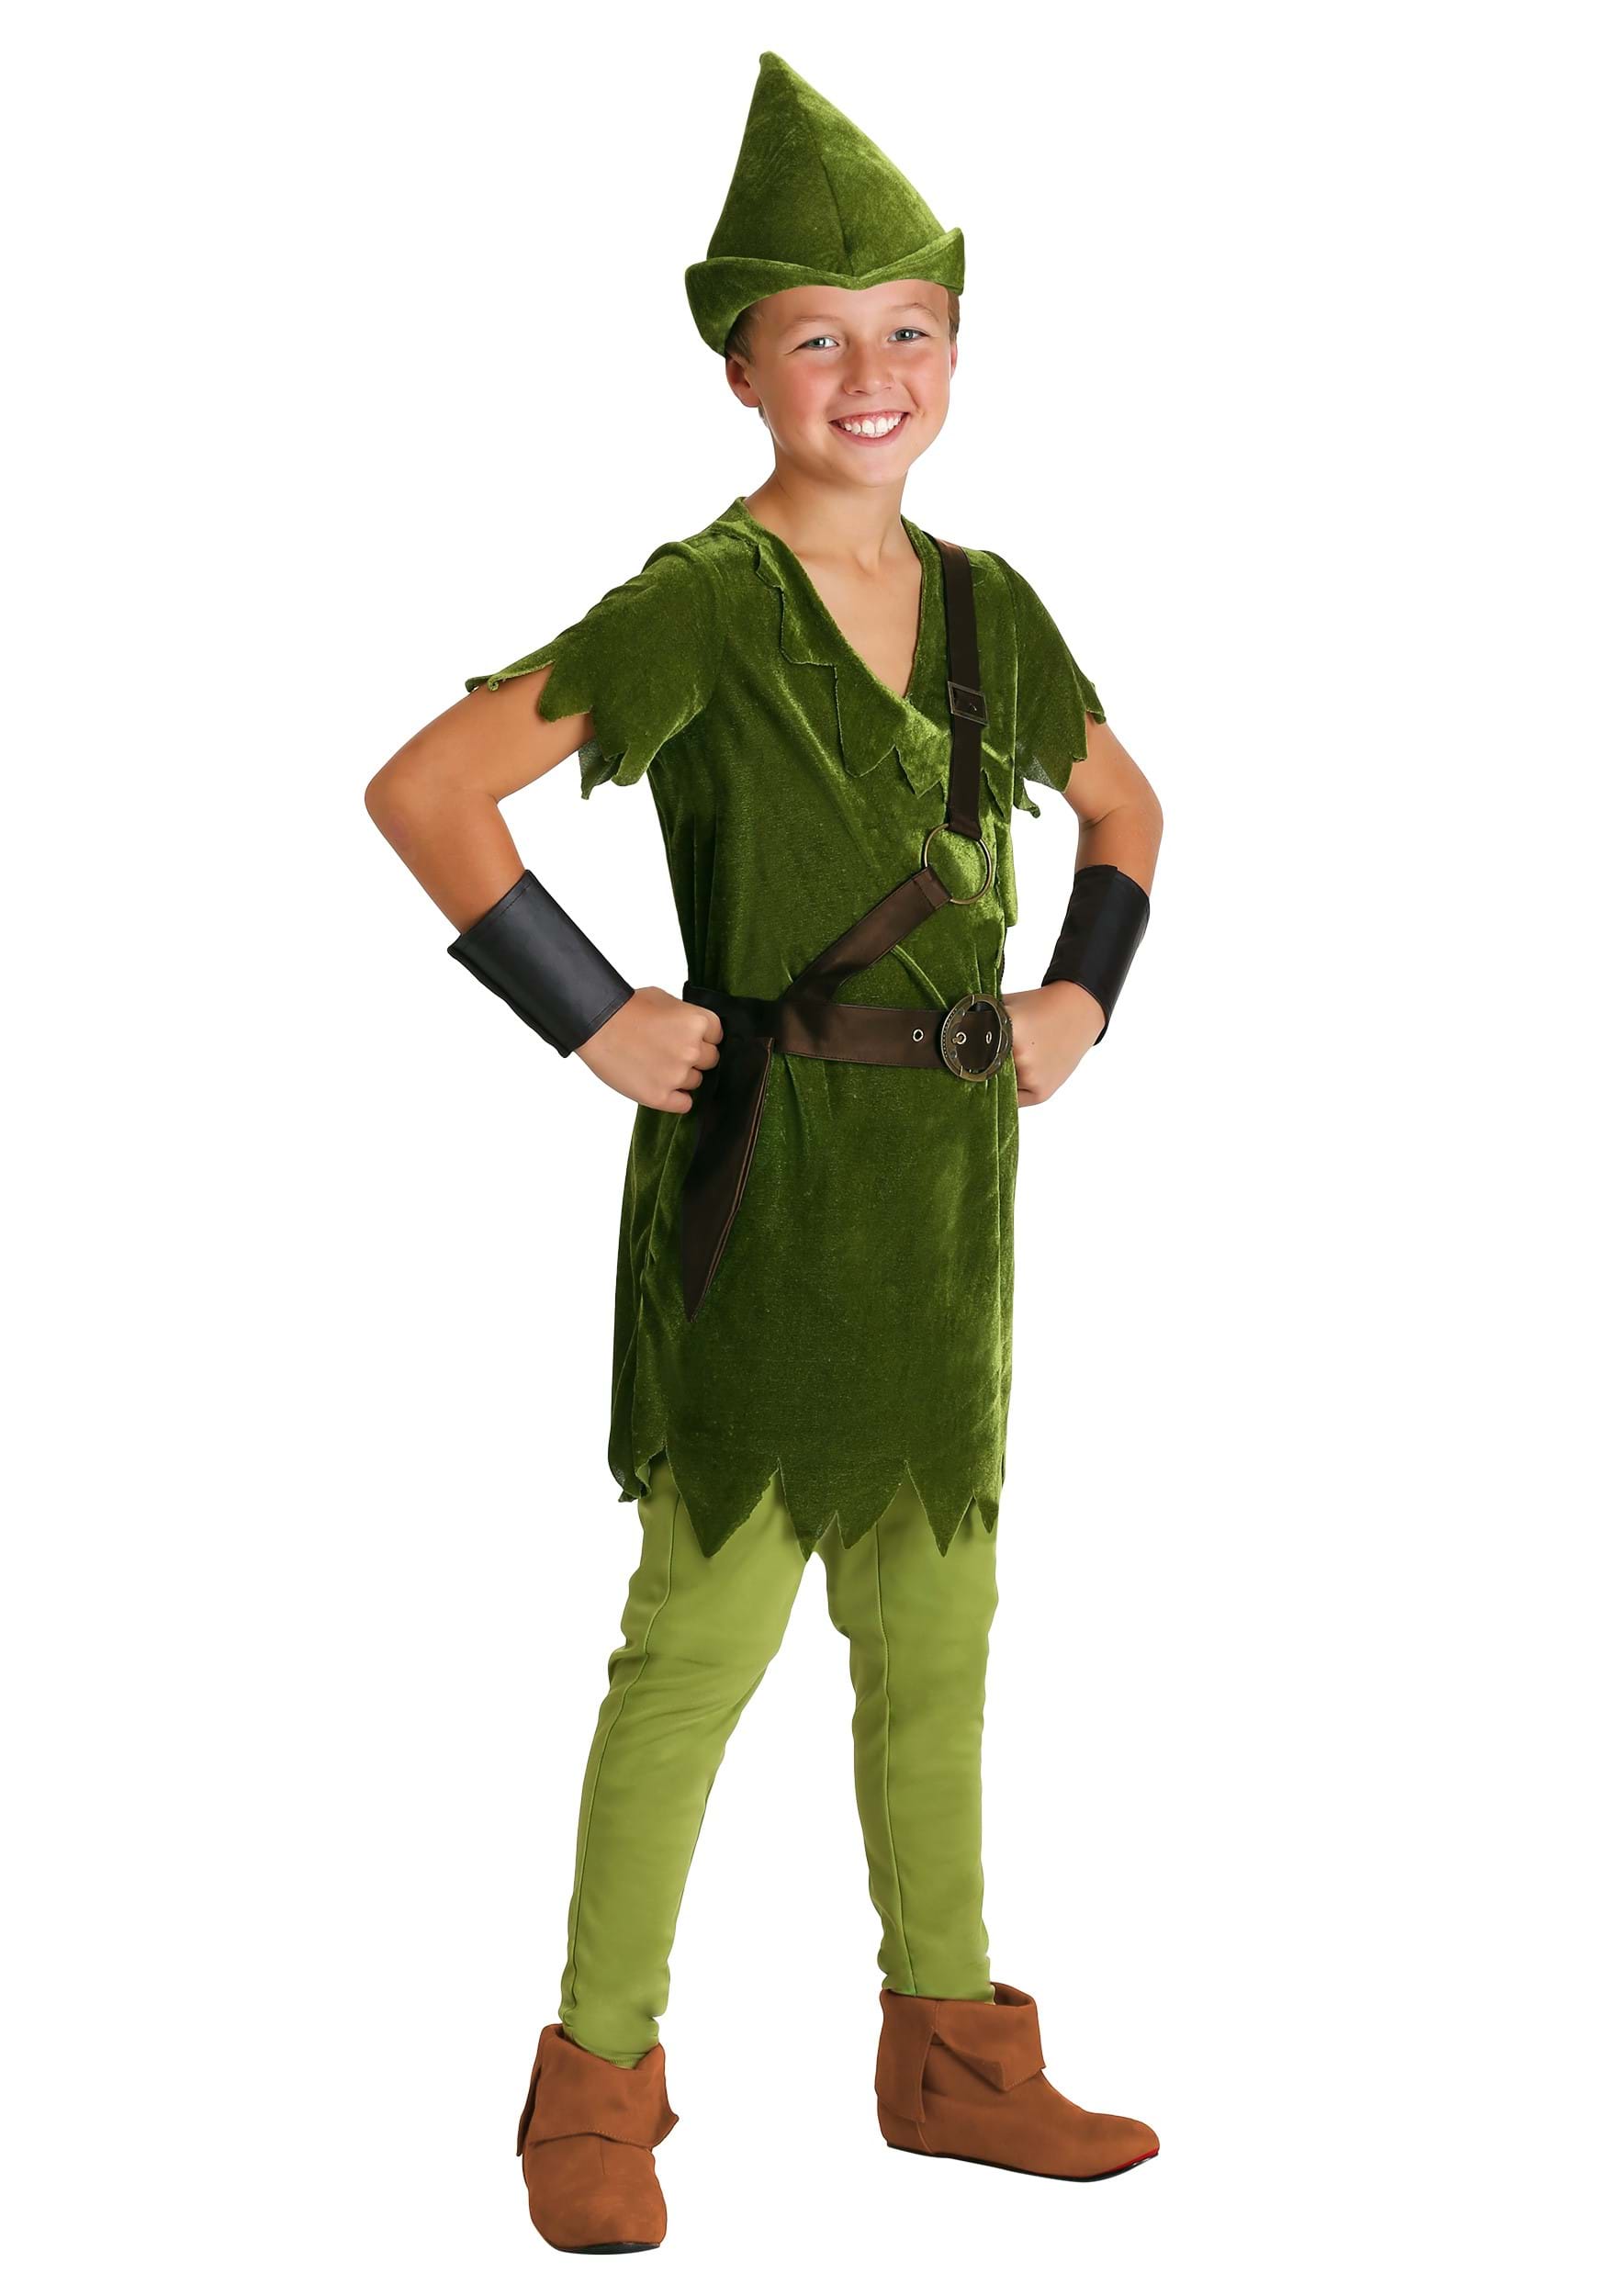 Photos - Fancy Dress A&D FUN Costumes Kid's Peter Pan Costume with Hat, Shirt, Tights, Belt/Harness 